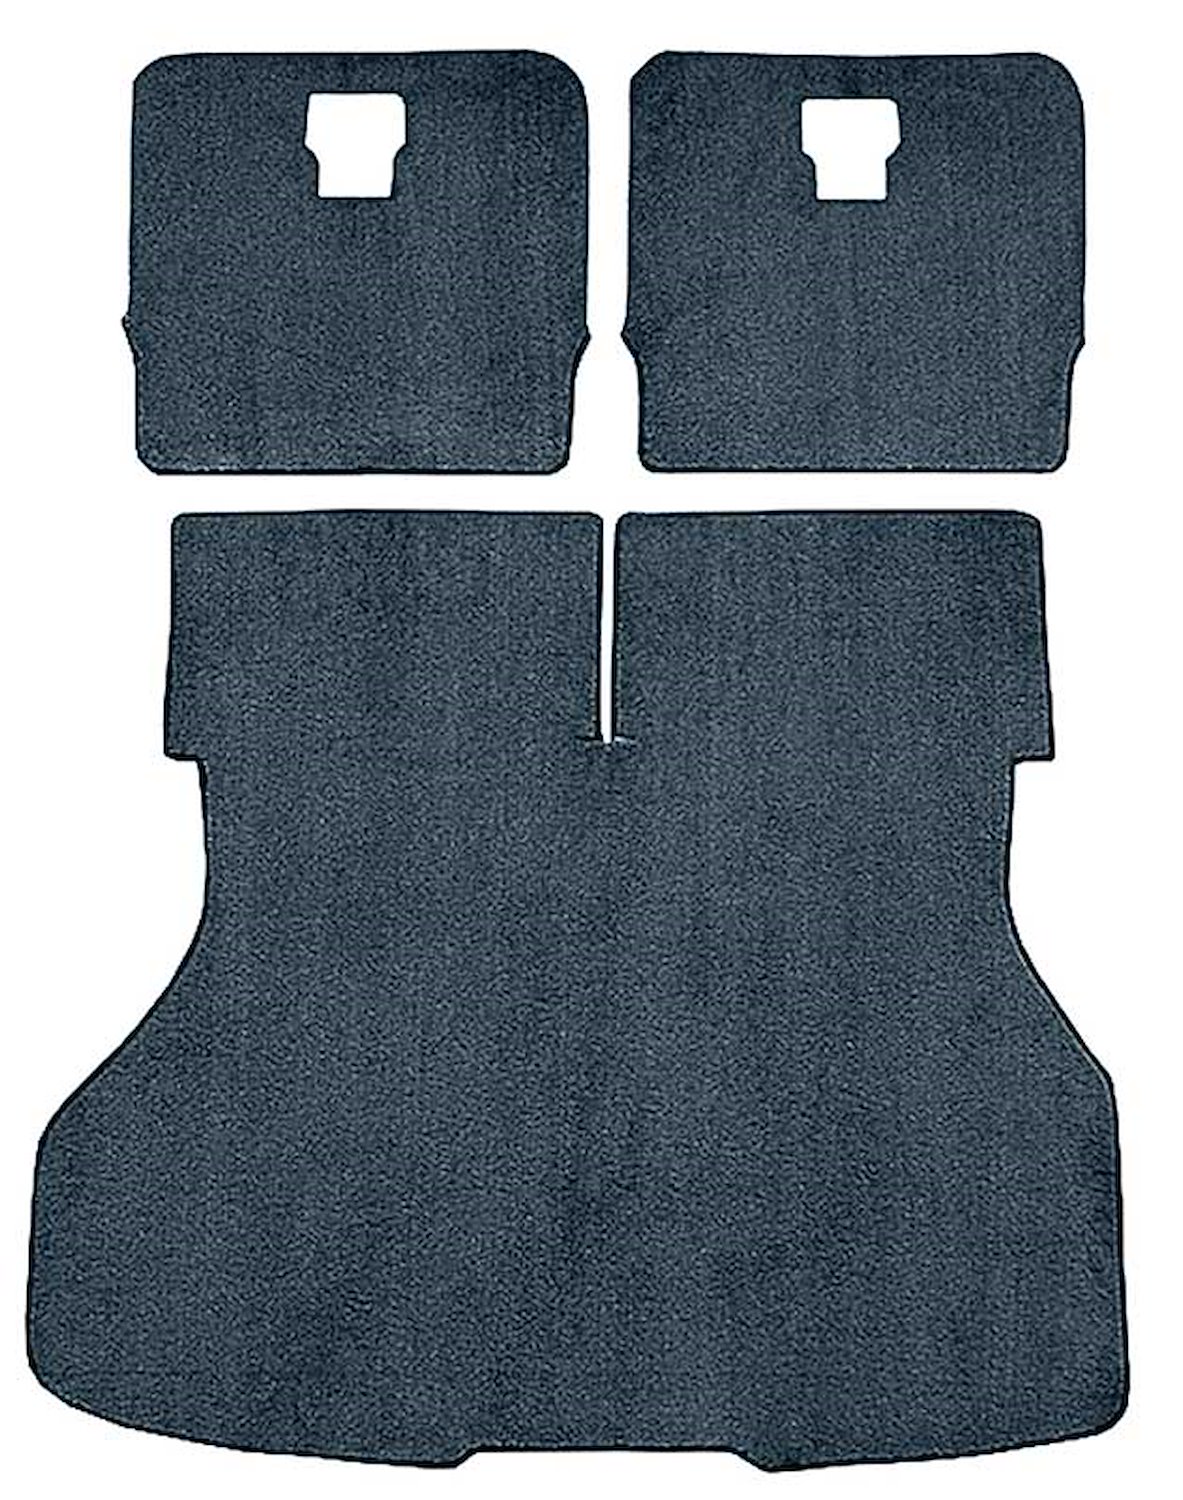 A4026B63 Rear Cargo Area Cut Pile Carpet Set With Mass Backing 1987-93 Mustang Hatchback Rear; Crystal Blue